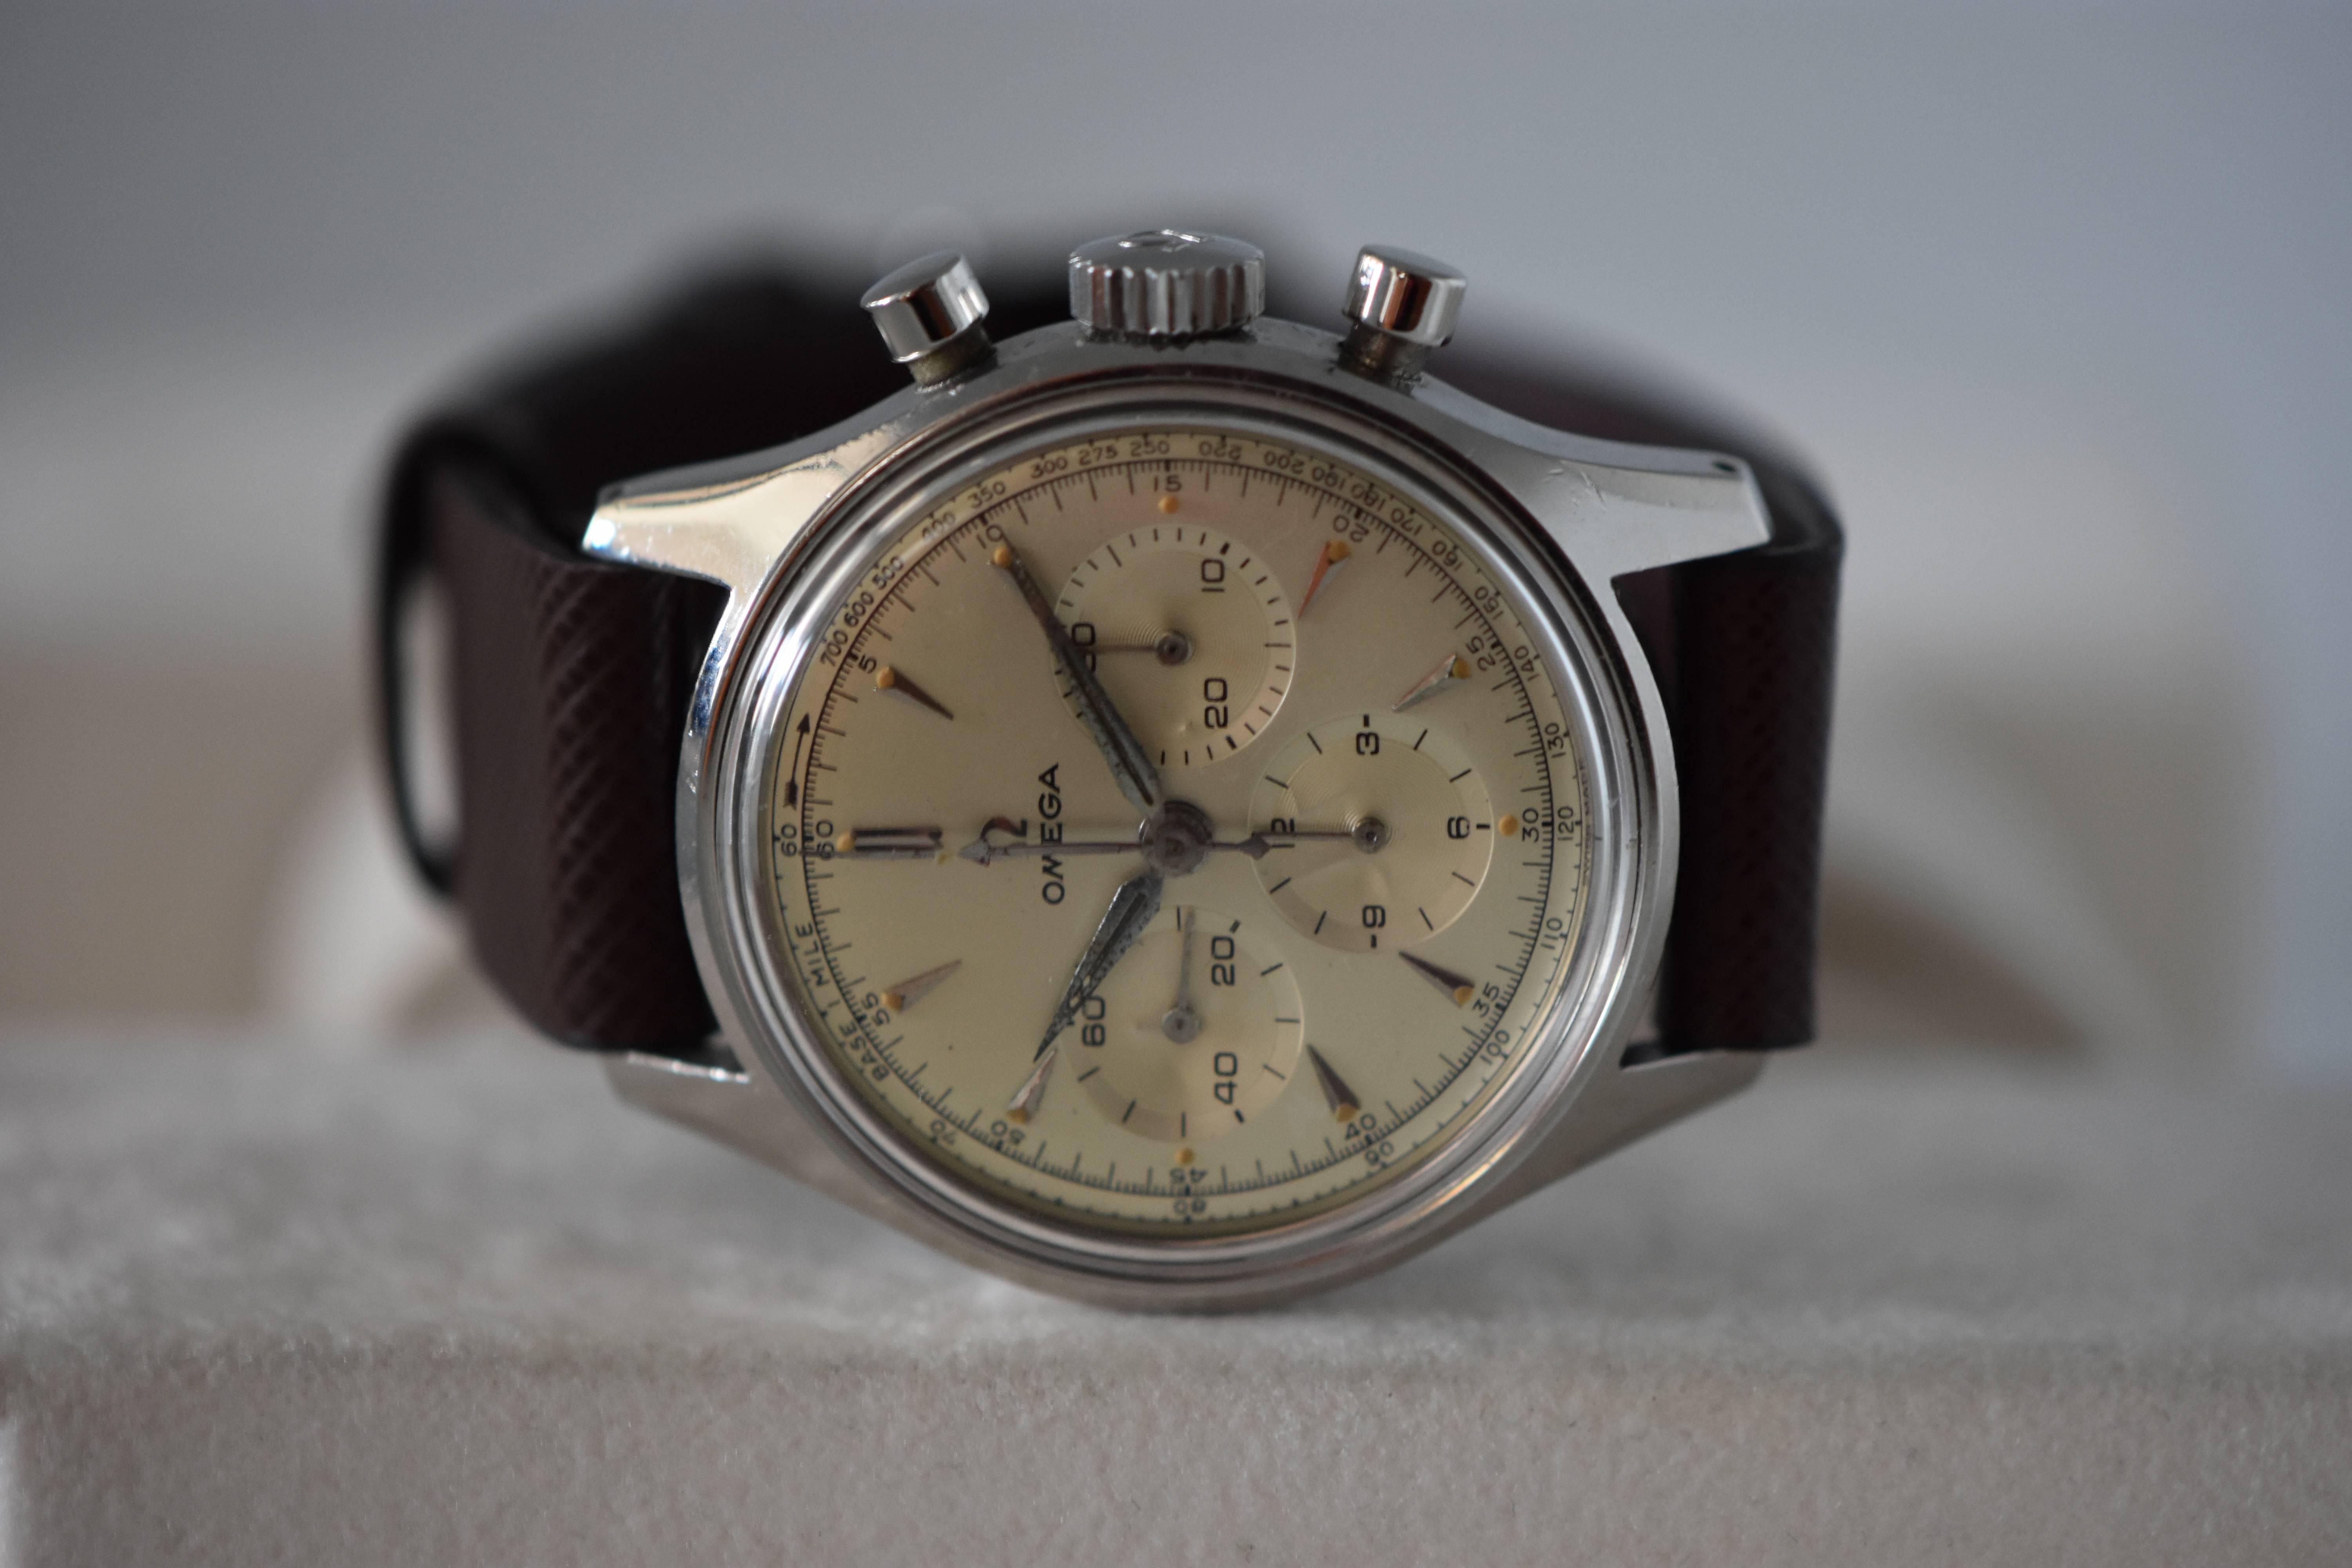 Reference: 2451-7

Circa: 1950s 

Movement: Manual-wind Caliber 321 with column wheel 

Case: 36mm, stainless steel, with screw-down case back; push/pull winding crown at 3 o'clock with Omega symbol; push-down chronograph pushers at 2 o'clock